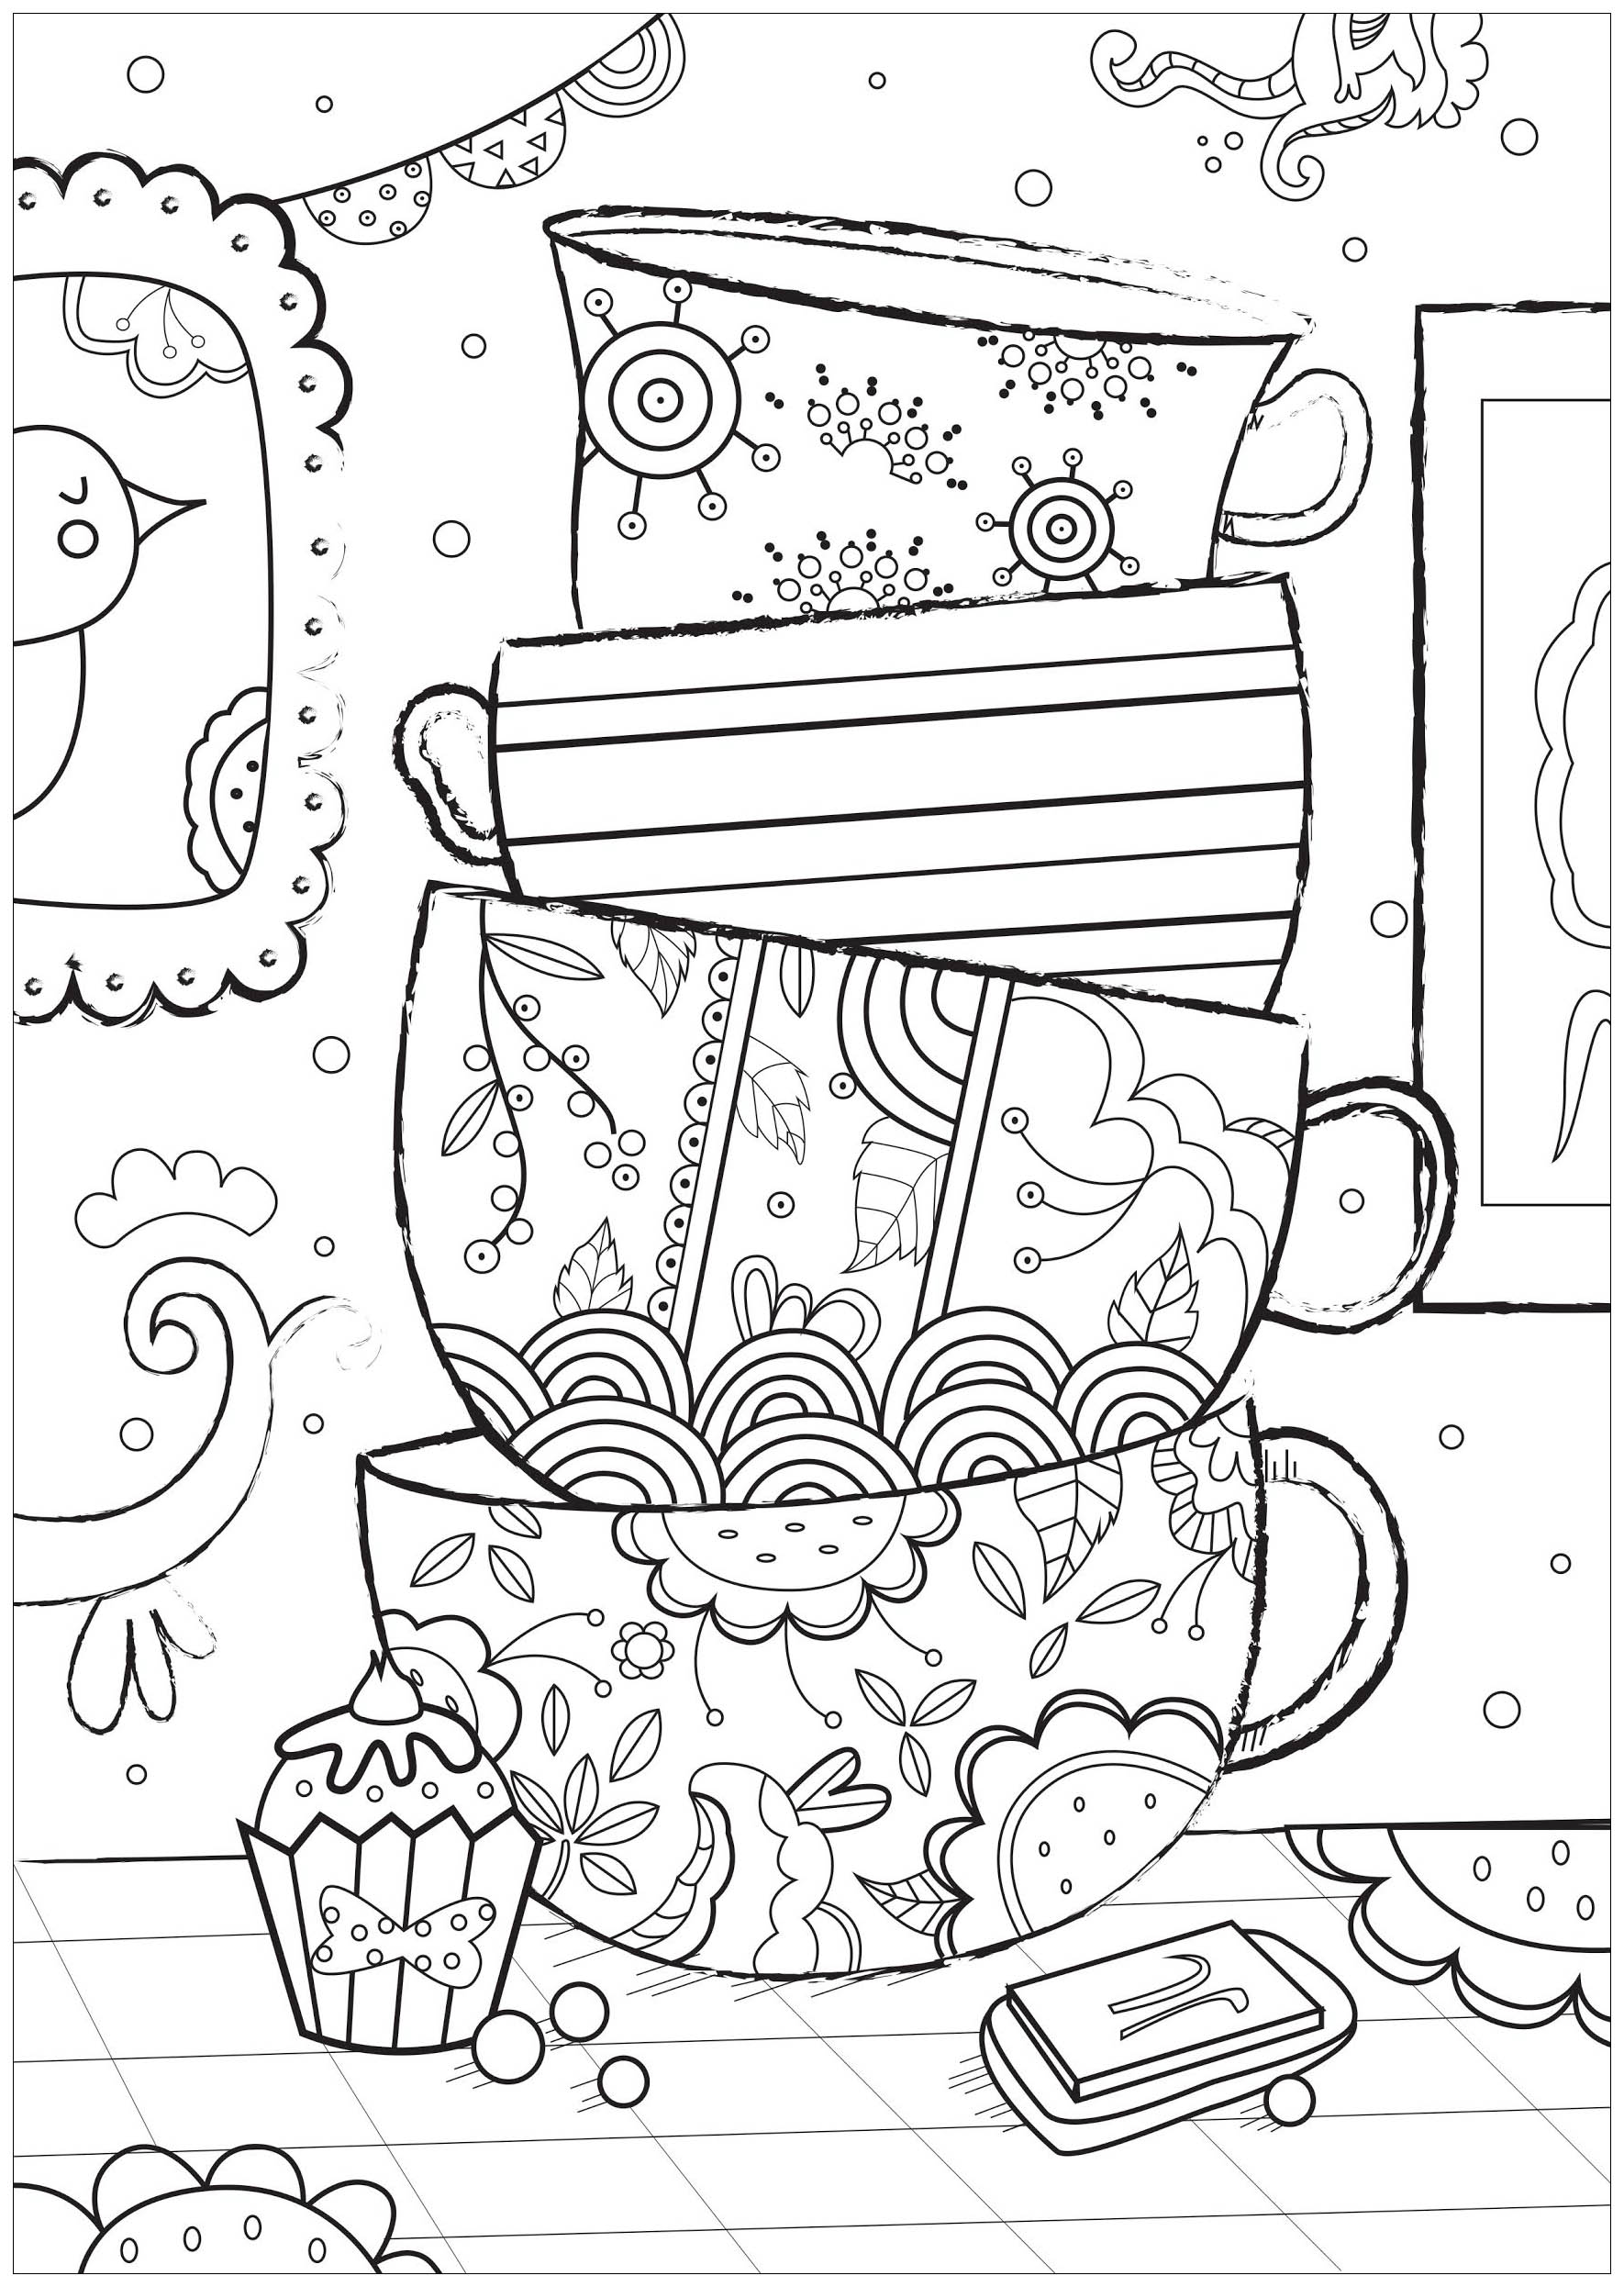 Pretty coloring cups. Color these beautiful stacked mugs. Each mug features unique designs, from abstract motifs to floral shapes.You can choose different colors for each mug and why not add patterns and designs to personalize them, Artist : Gaelle Picard